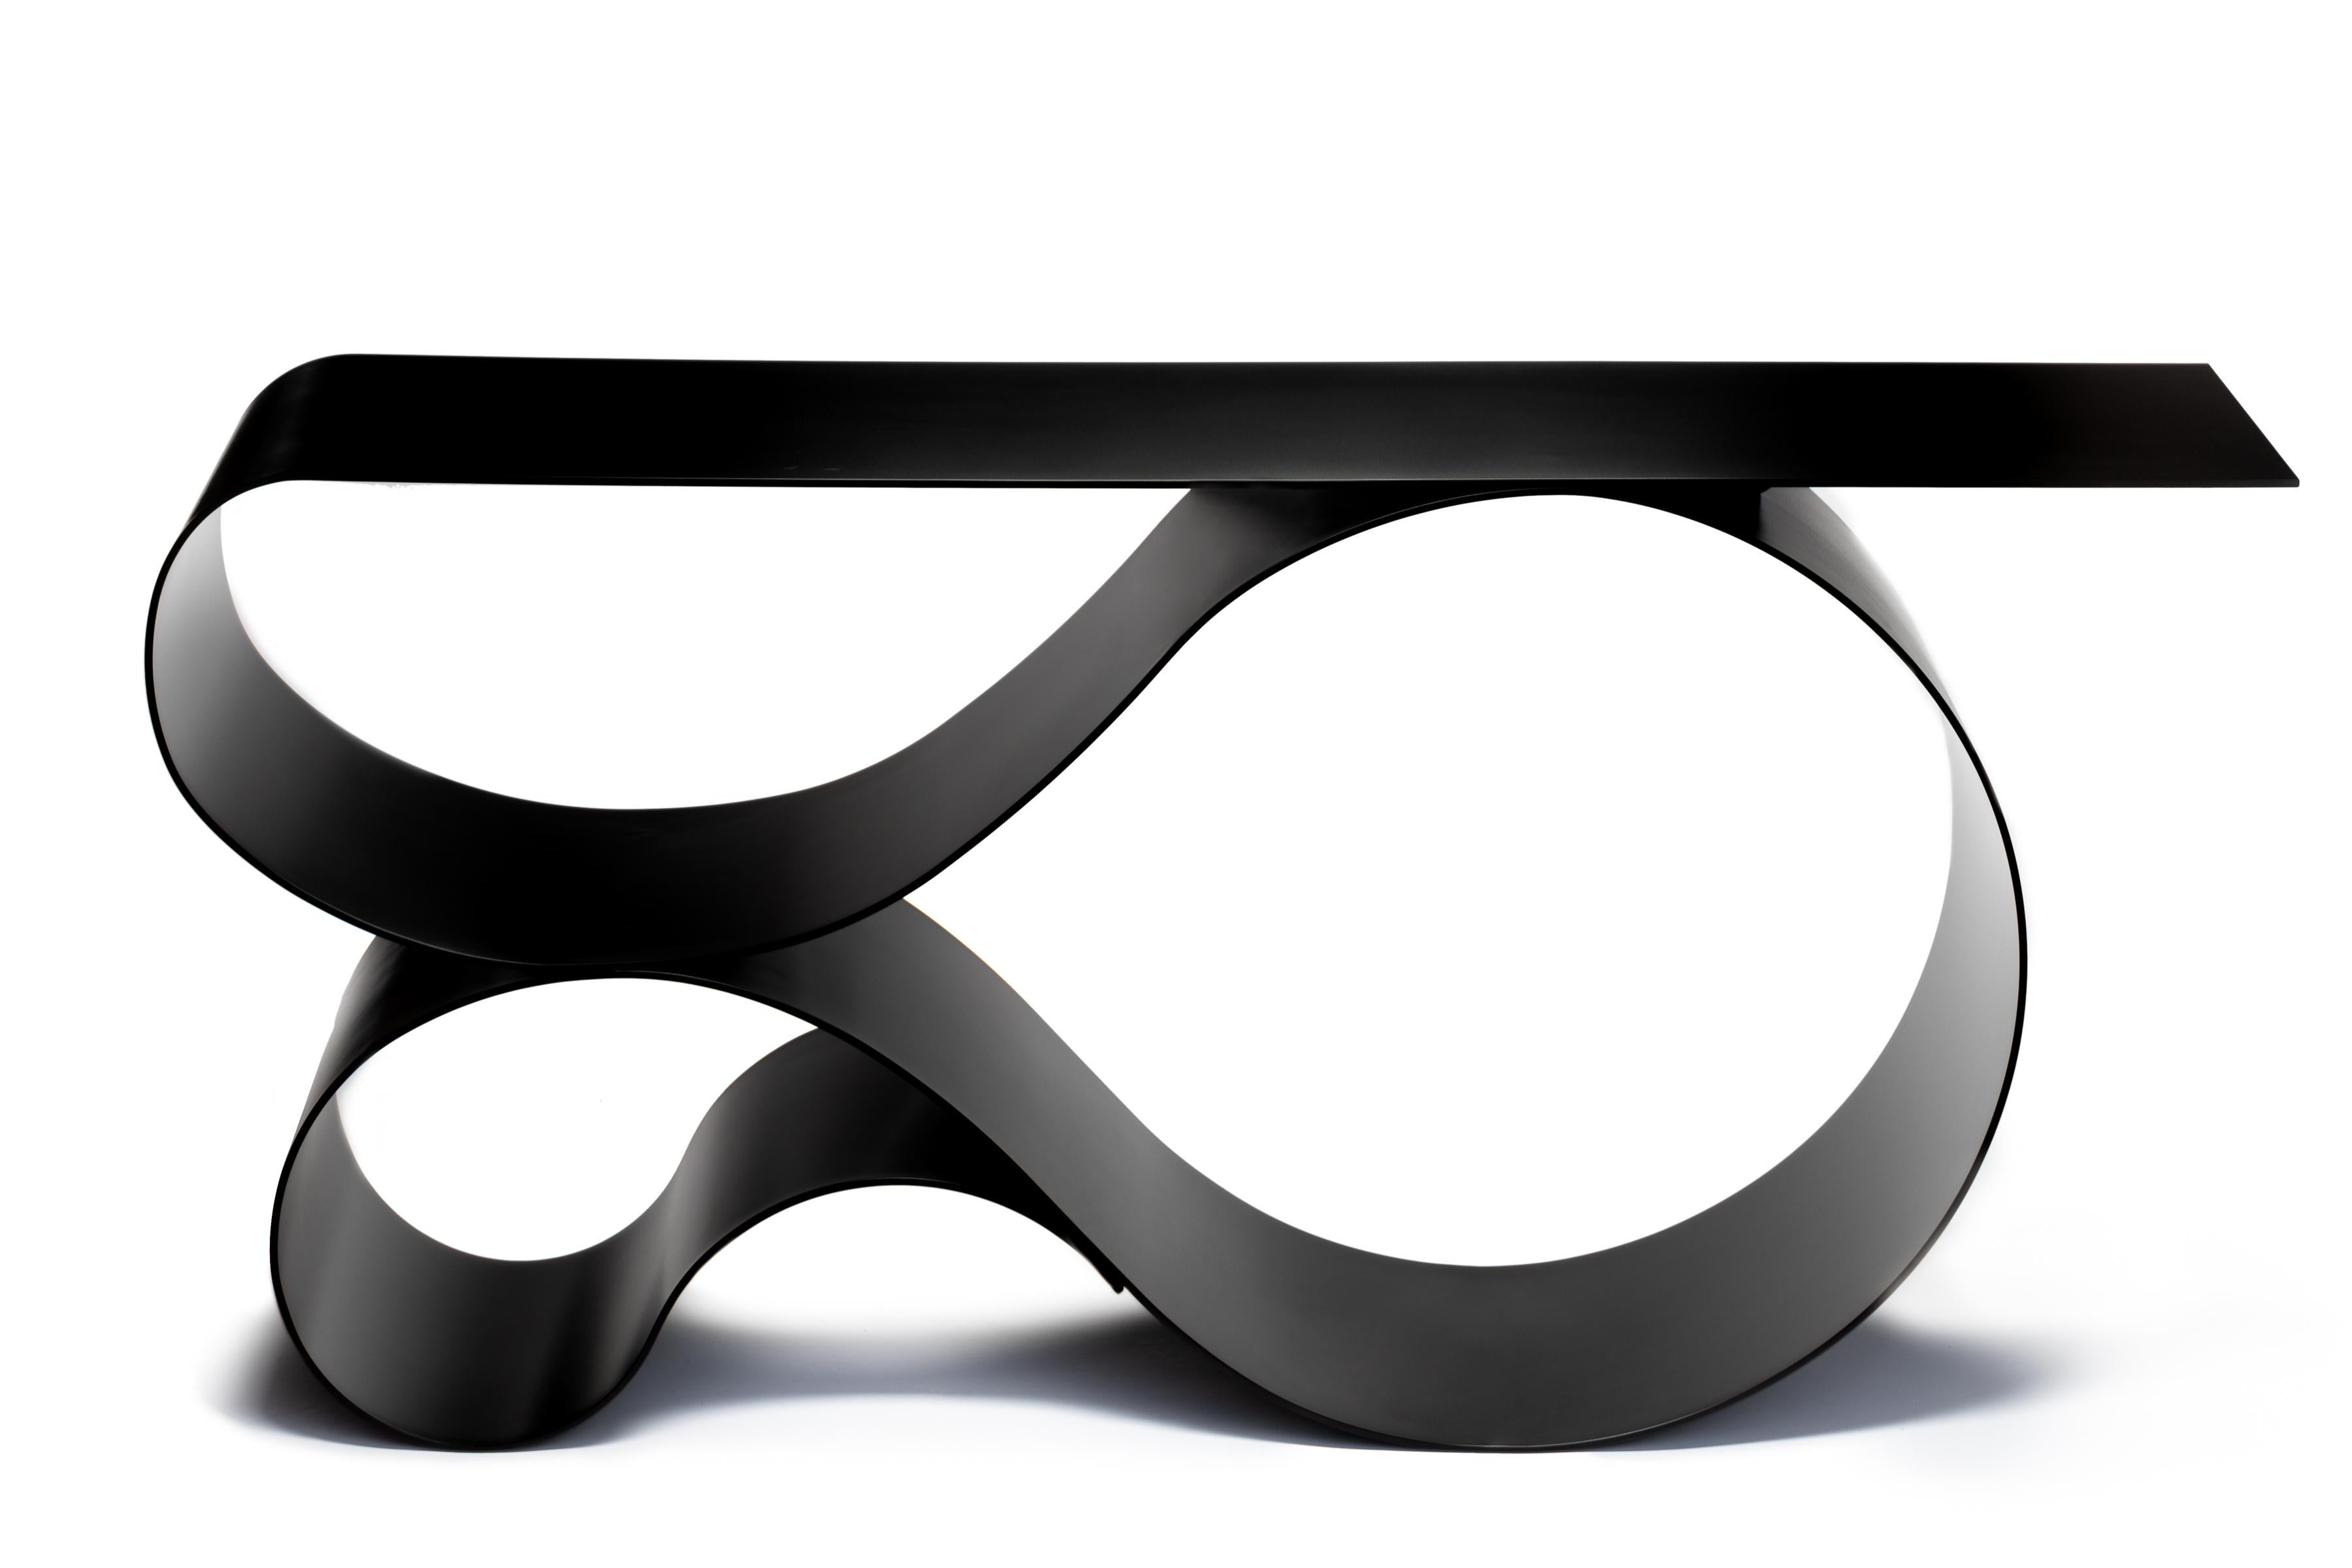 Whorl console in black matte powder coated aluminum by Neal Aronowitz Design
Dimensions: D 43.2 x W 160 x H 76.2 cm
Materials: Powder coated aluminium.
Size, colors and finish can be modified and customized. 

An elegant and powerful sculptural